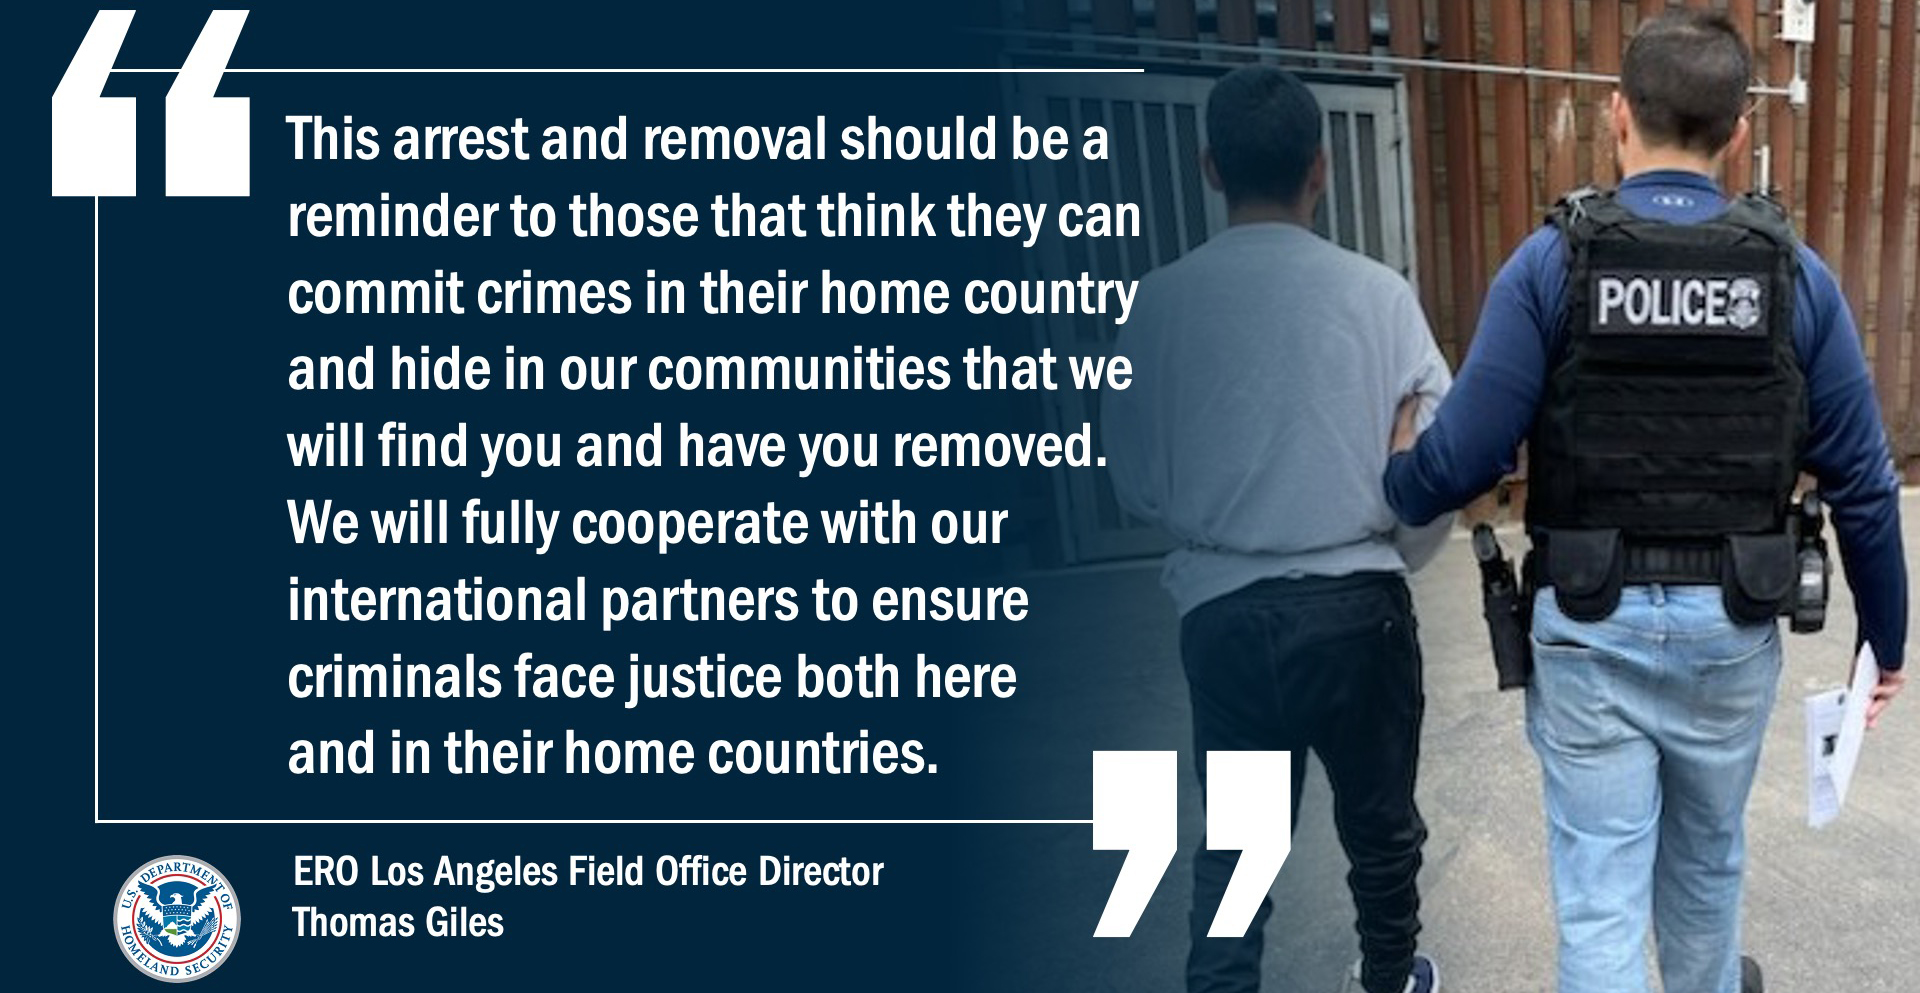 “This arrest and removal should be a reminder to those that think they can commit crimes in their home country and hide in our communities that we will find you and have you removed,” said ERO Los Angeles Field Office Director Thomas Giles. “We will fully cooperate with our international partners to ensure criminals face justice both here and in their home countries.”